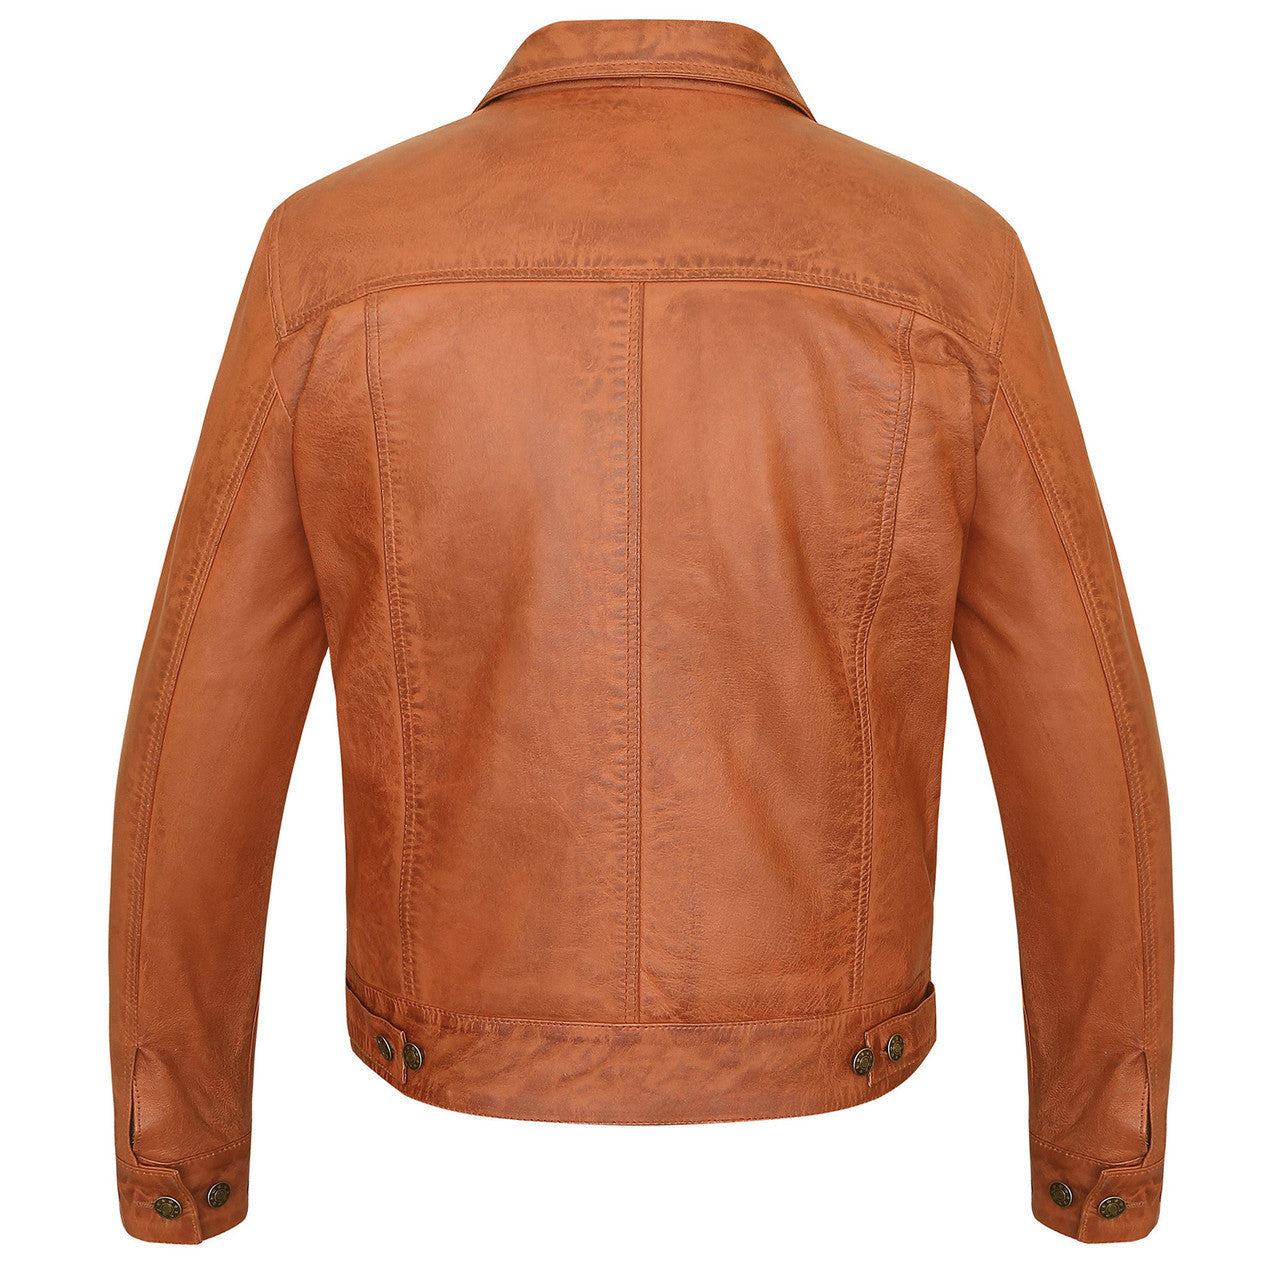 Vance-Leathers-VL555Br-Mens-Austin-Brown-Motorcycle-Trucker-Leather-Jacket-back-view